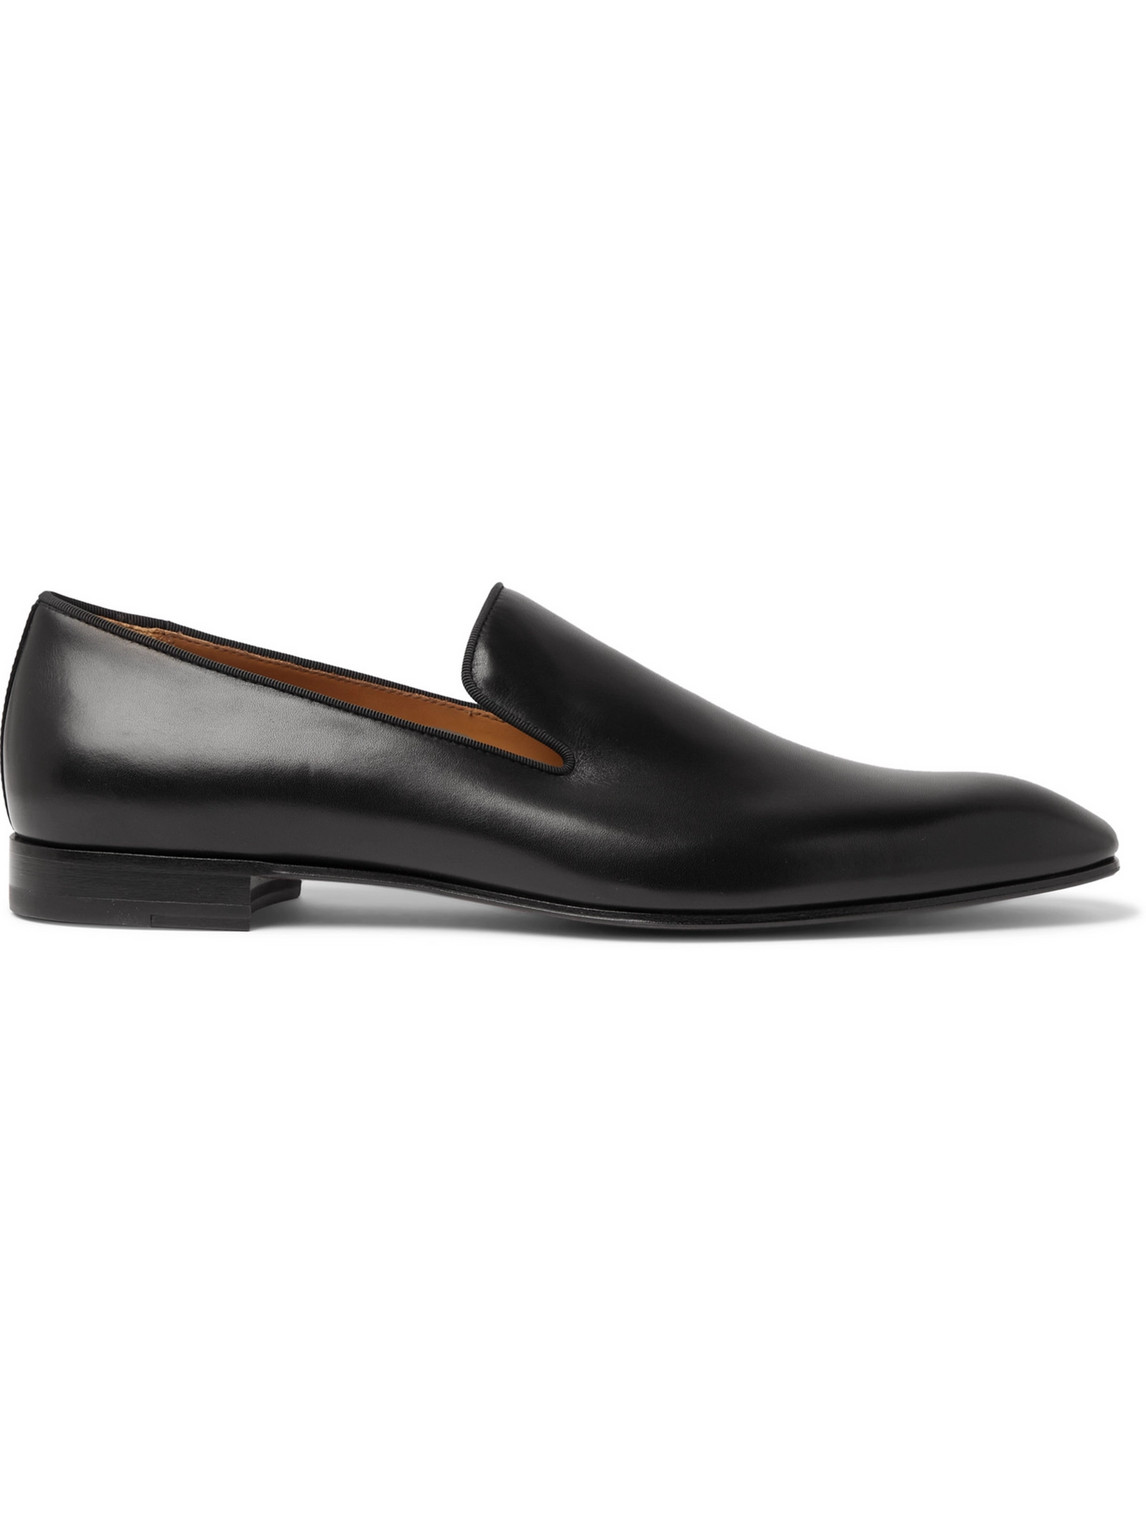 CHRISTIAN LOUBOUTIN DANDELION LEATHER LOAFERS